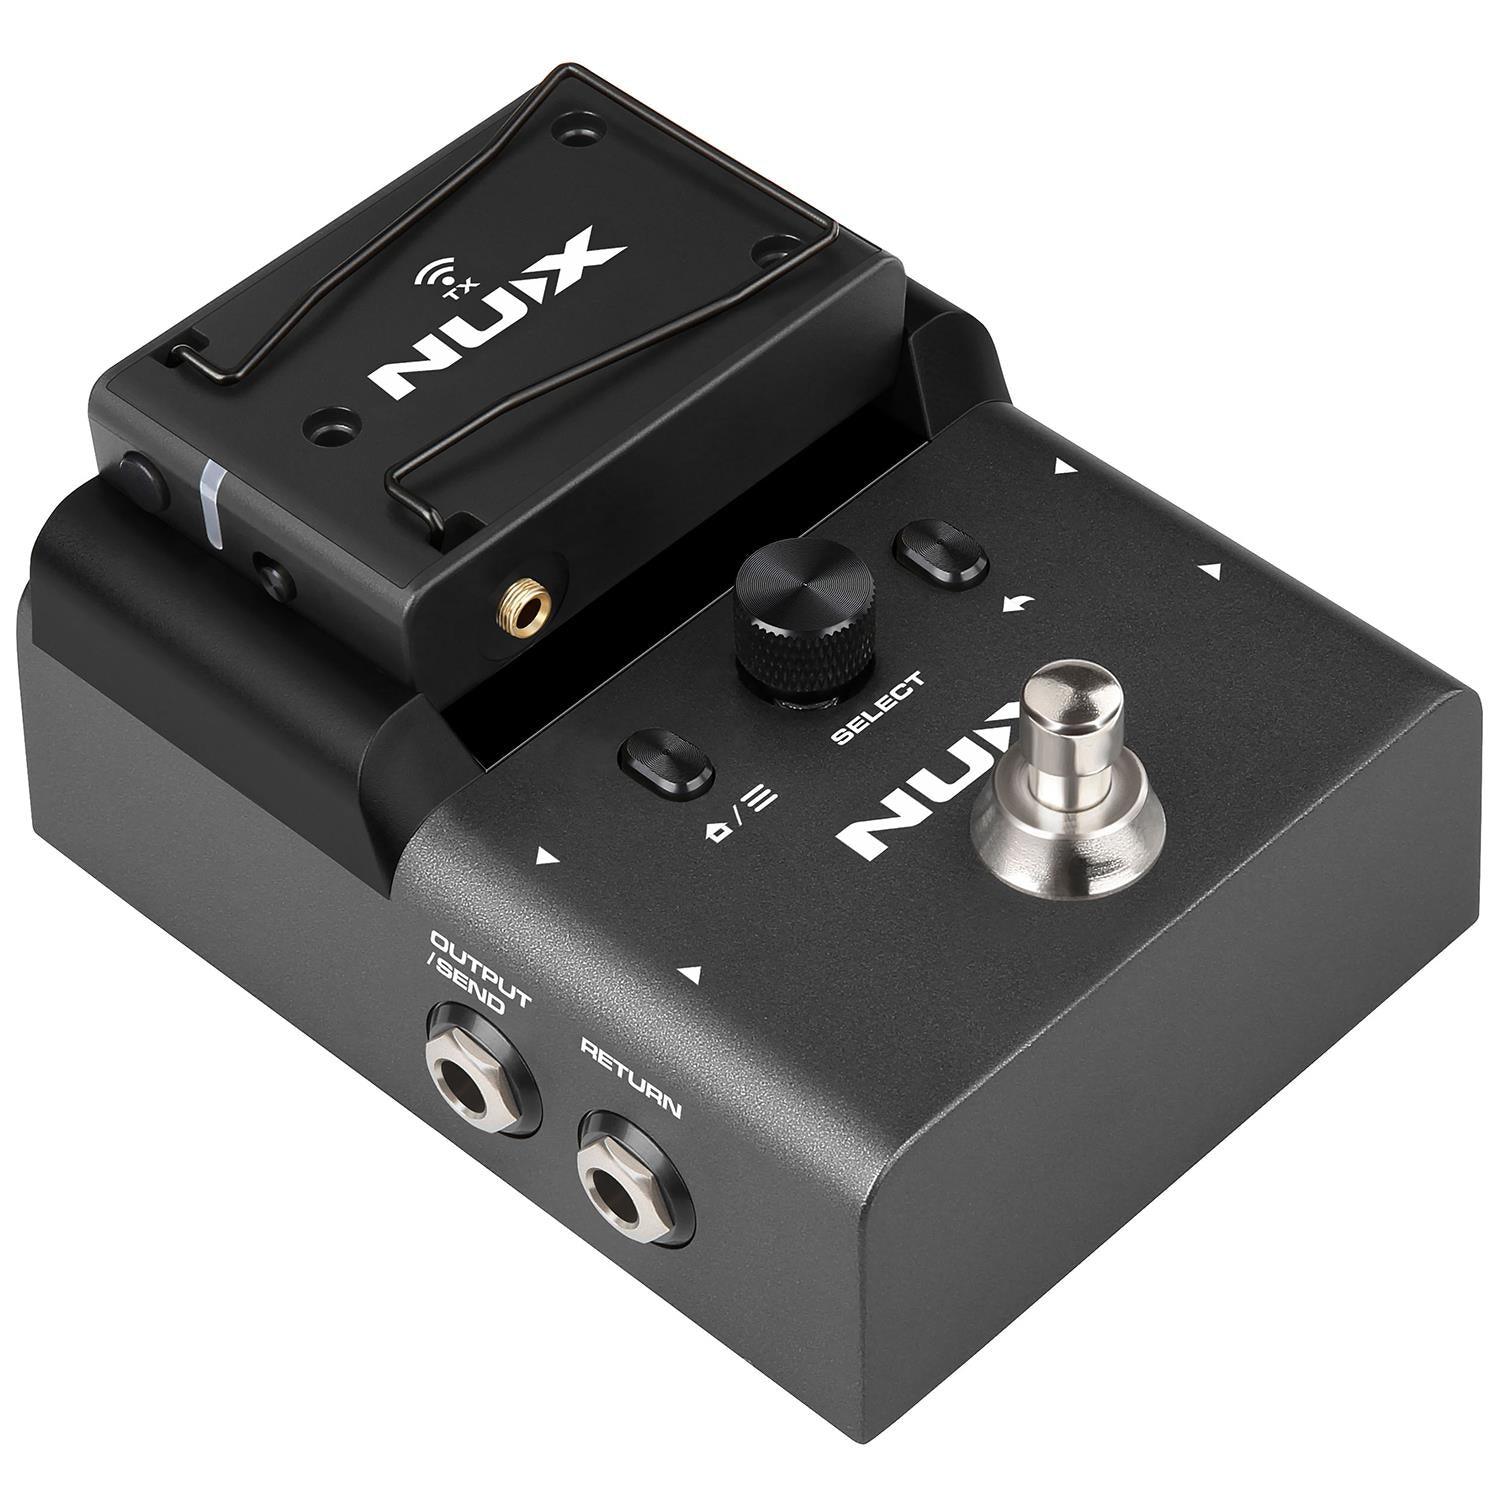 NUX B-8 Instrument Pedal Wireless System 2.4GHz - DY Pro Audio